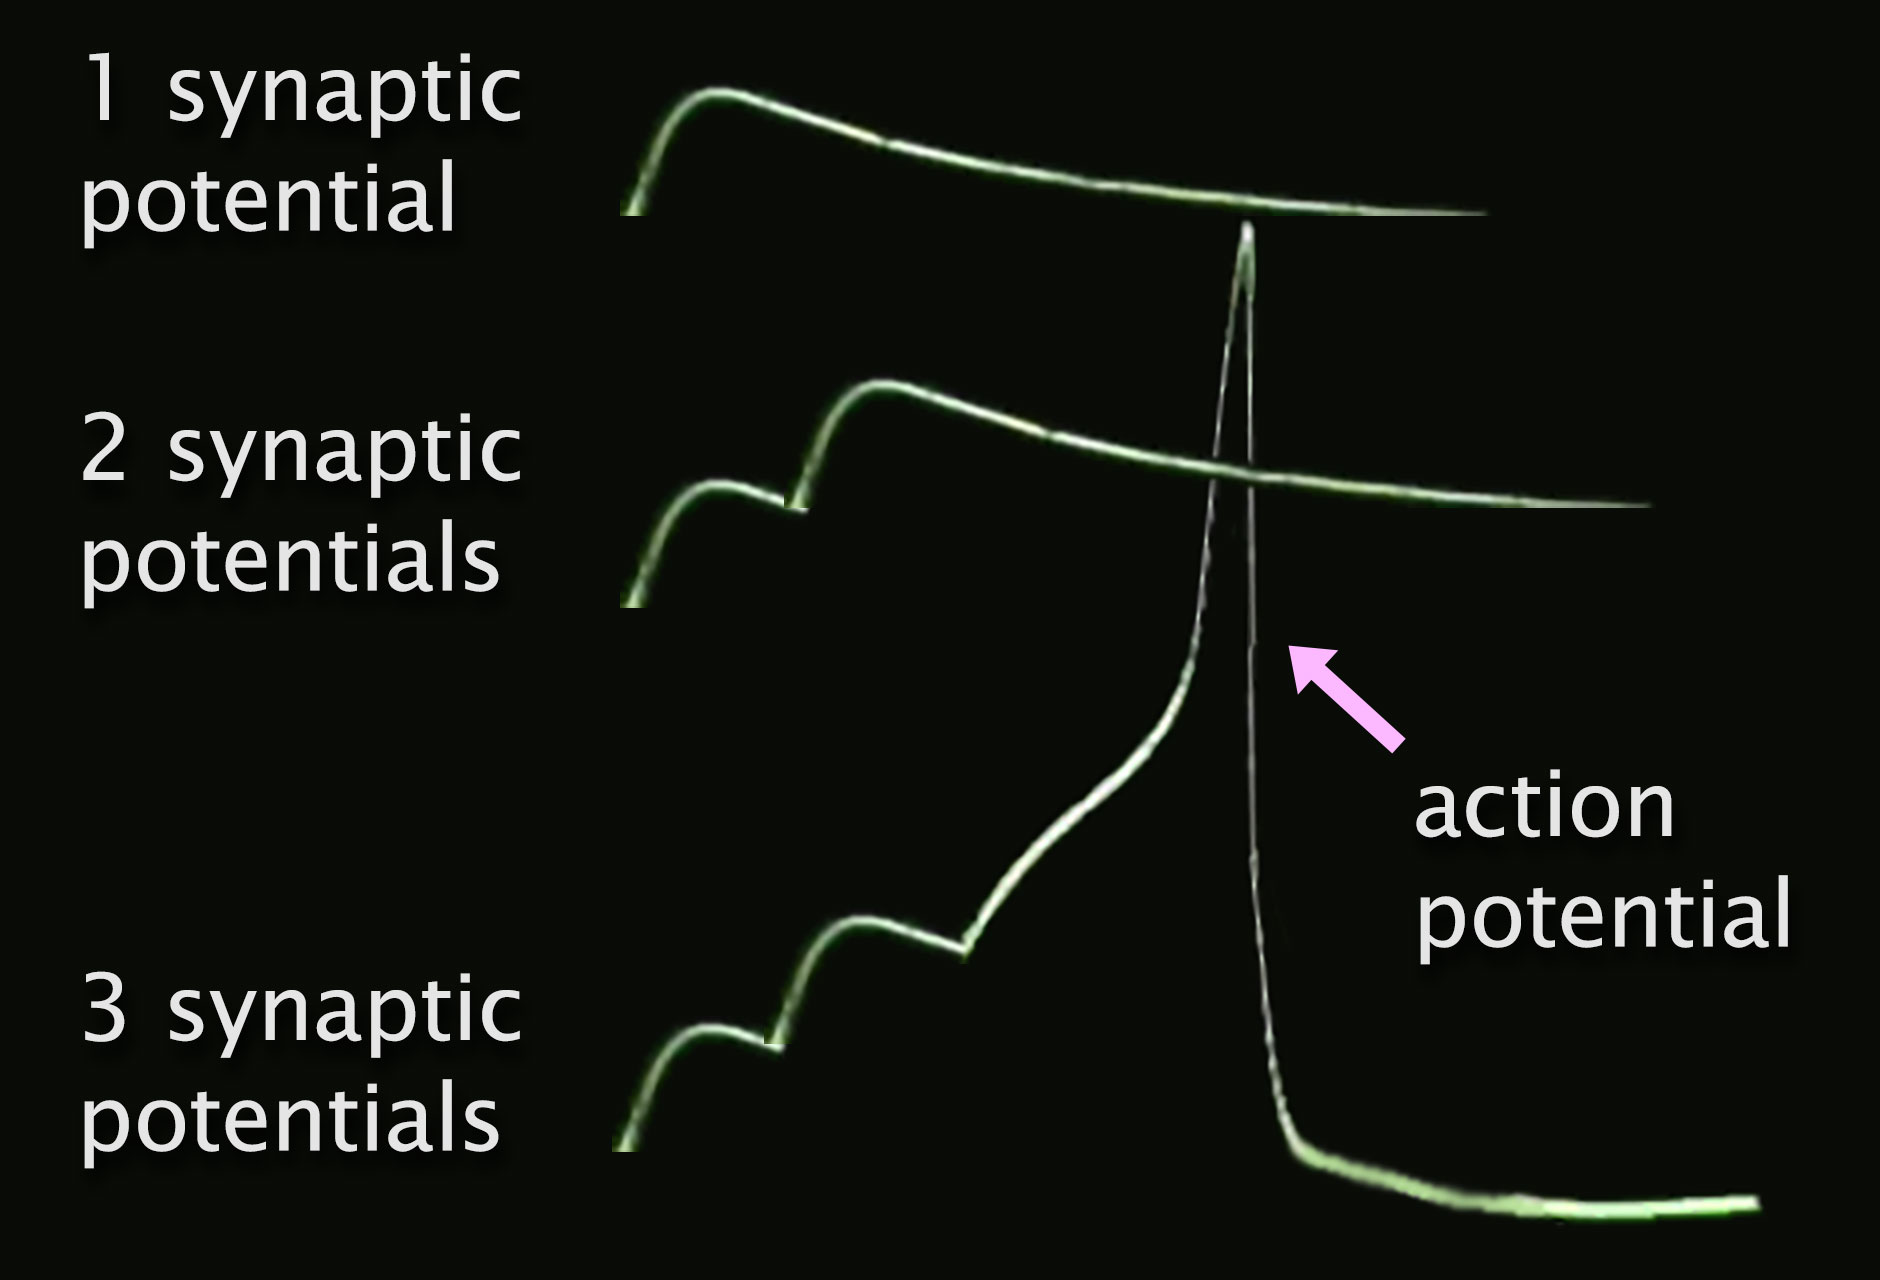 Electrical activity graphs show how three progressive synaptic potentials can trigger an action potential.